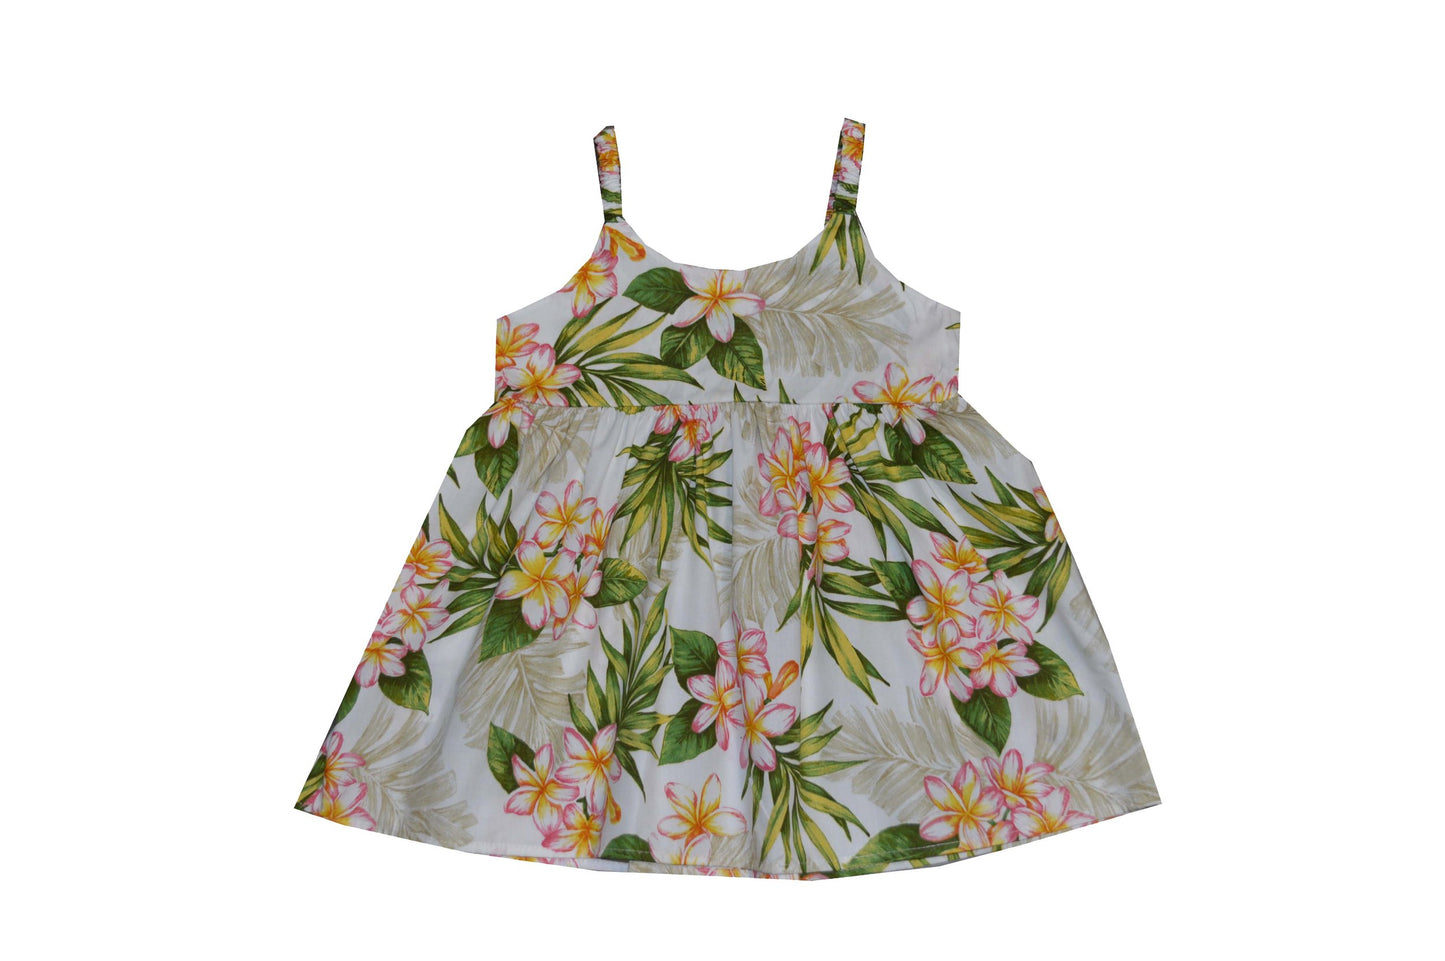 Plumeria Sunny Bungee Dress for Little Girls Soft Cotton Made in Hawaii